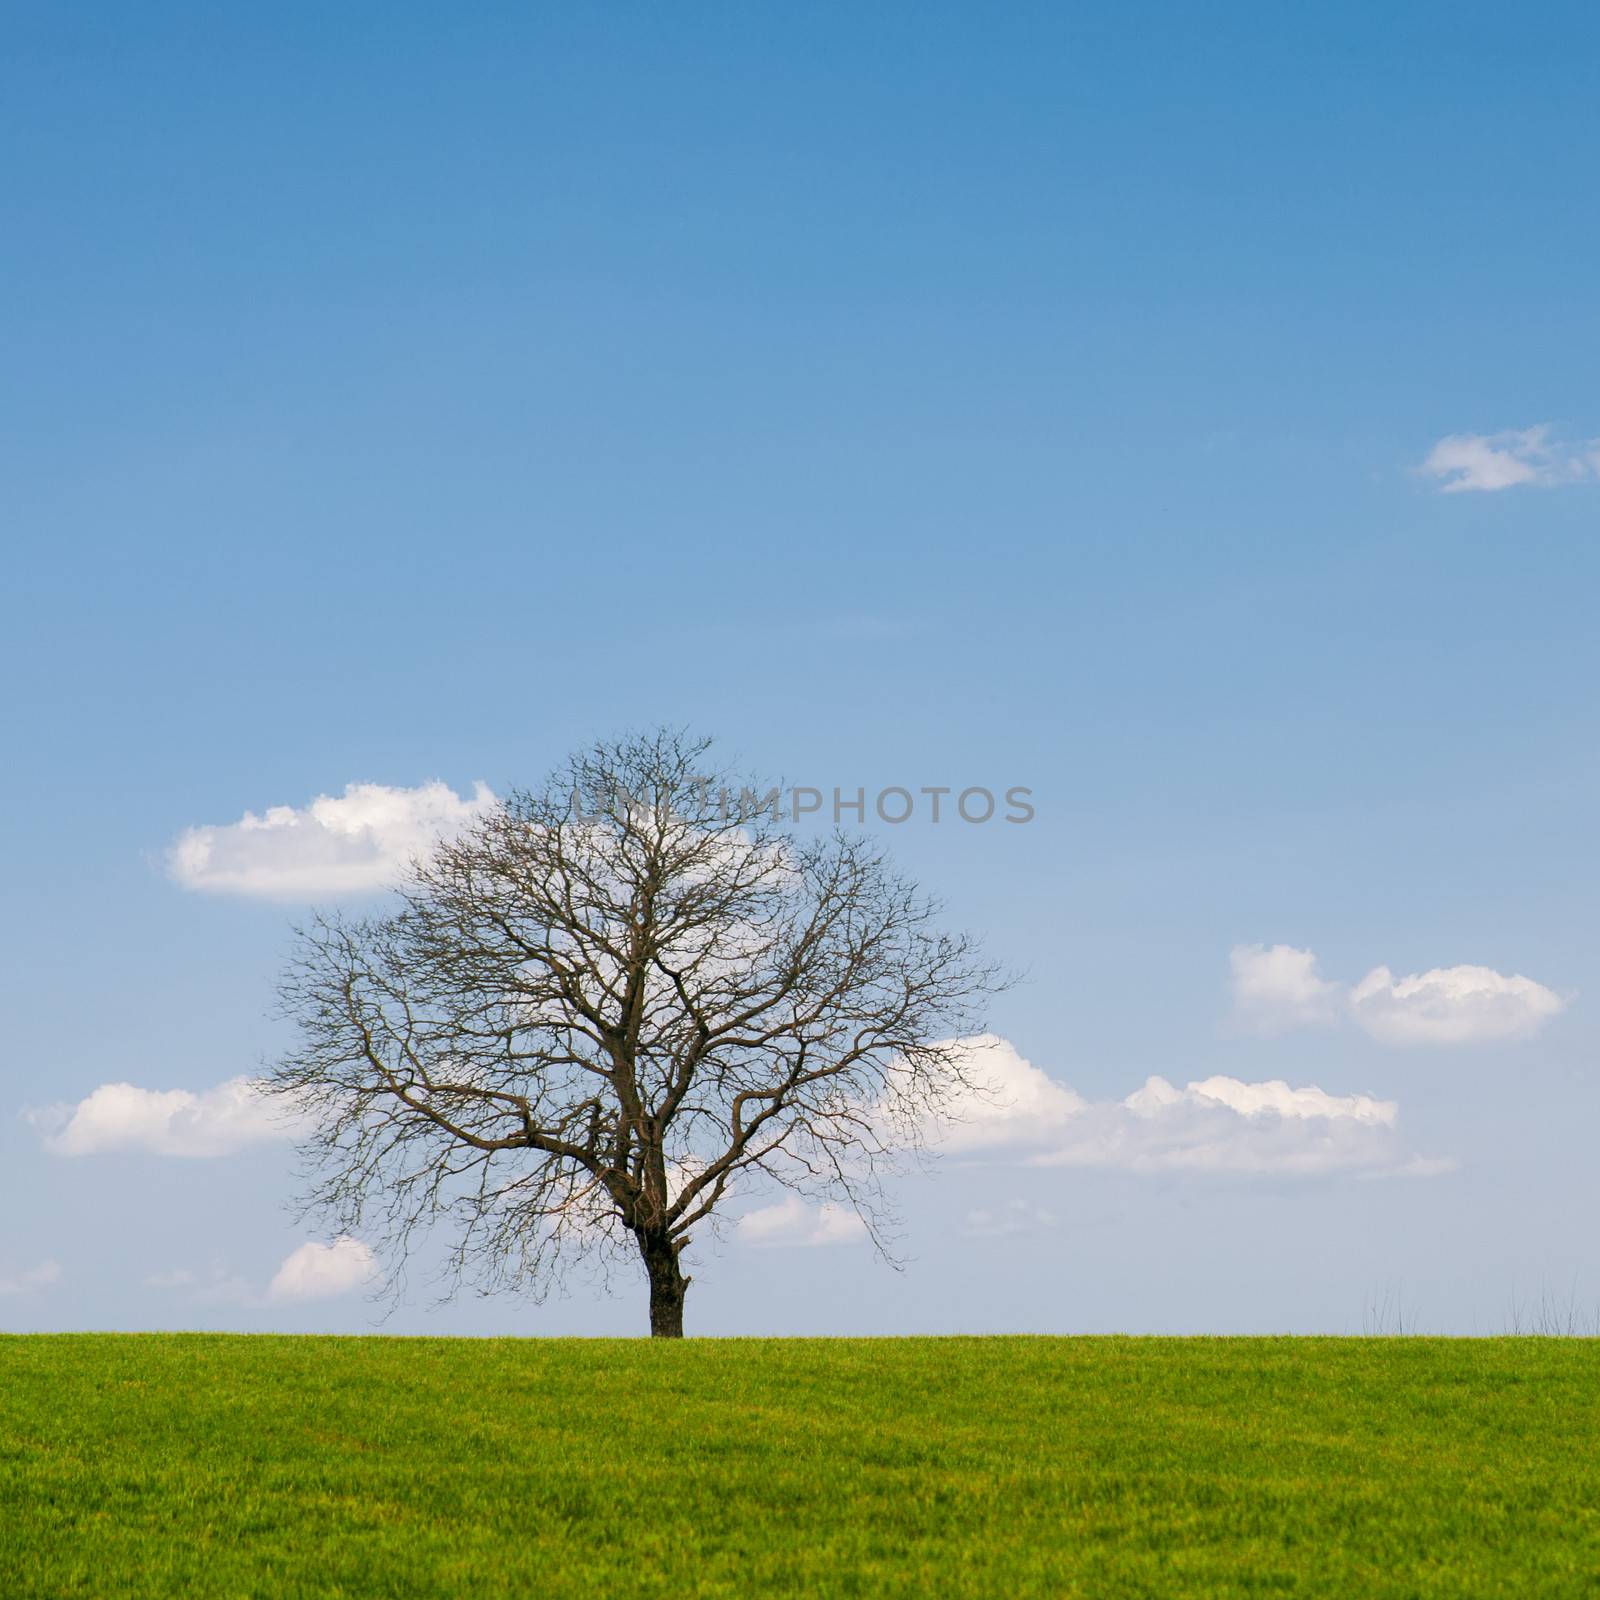 Lonely leafless tree on grass field with blue sky.